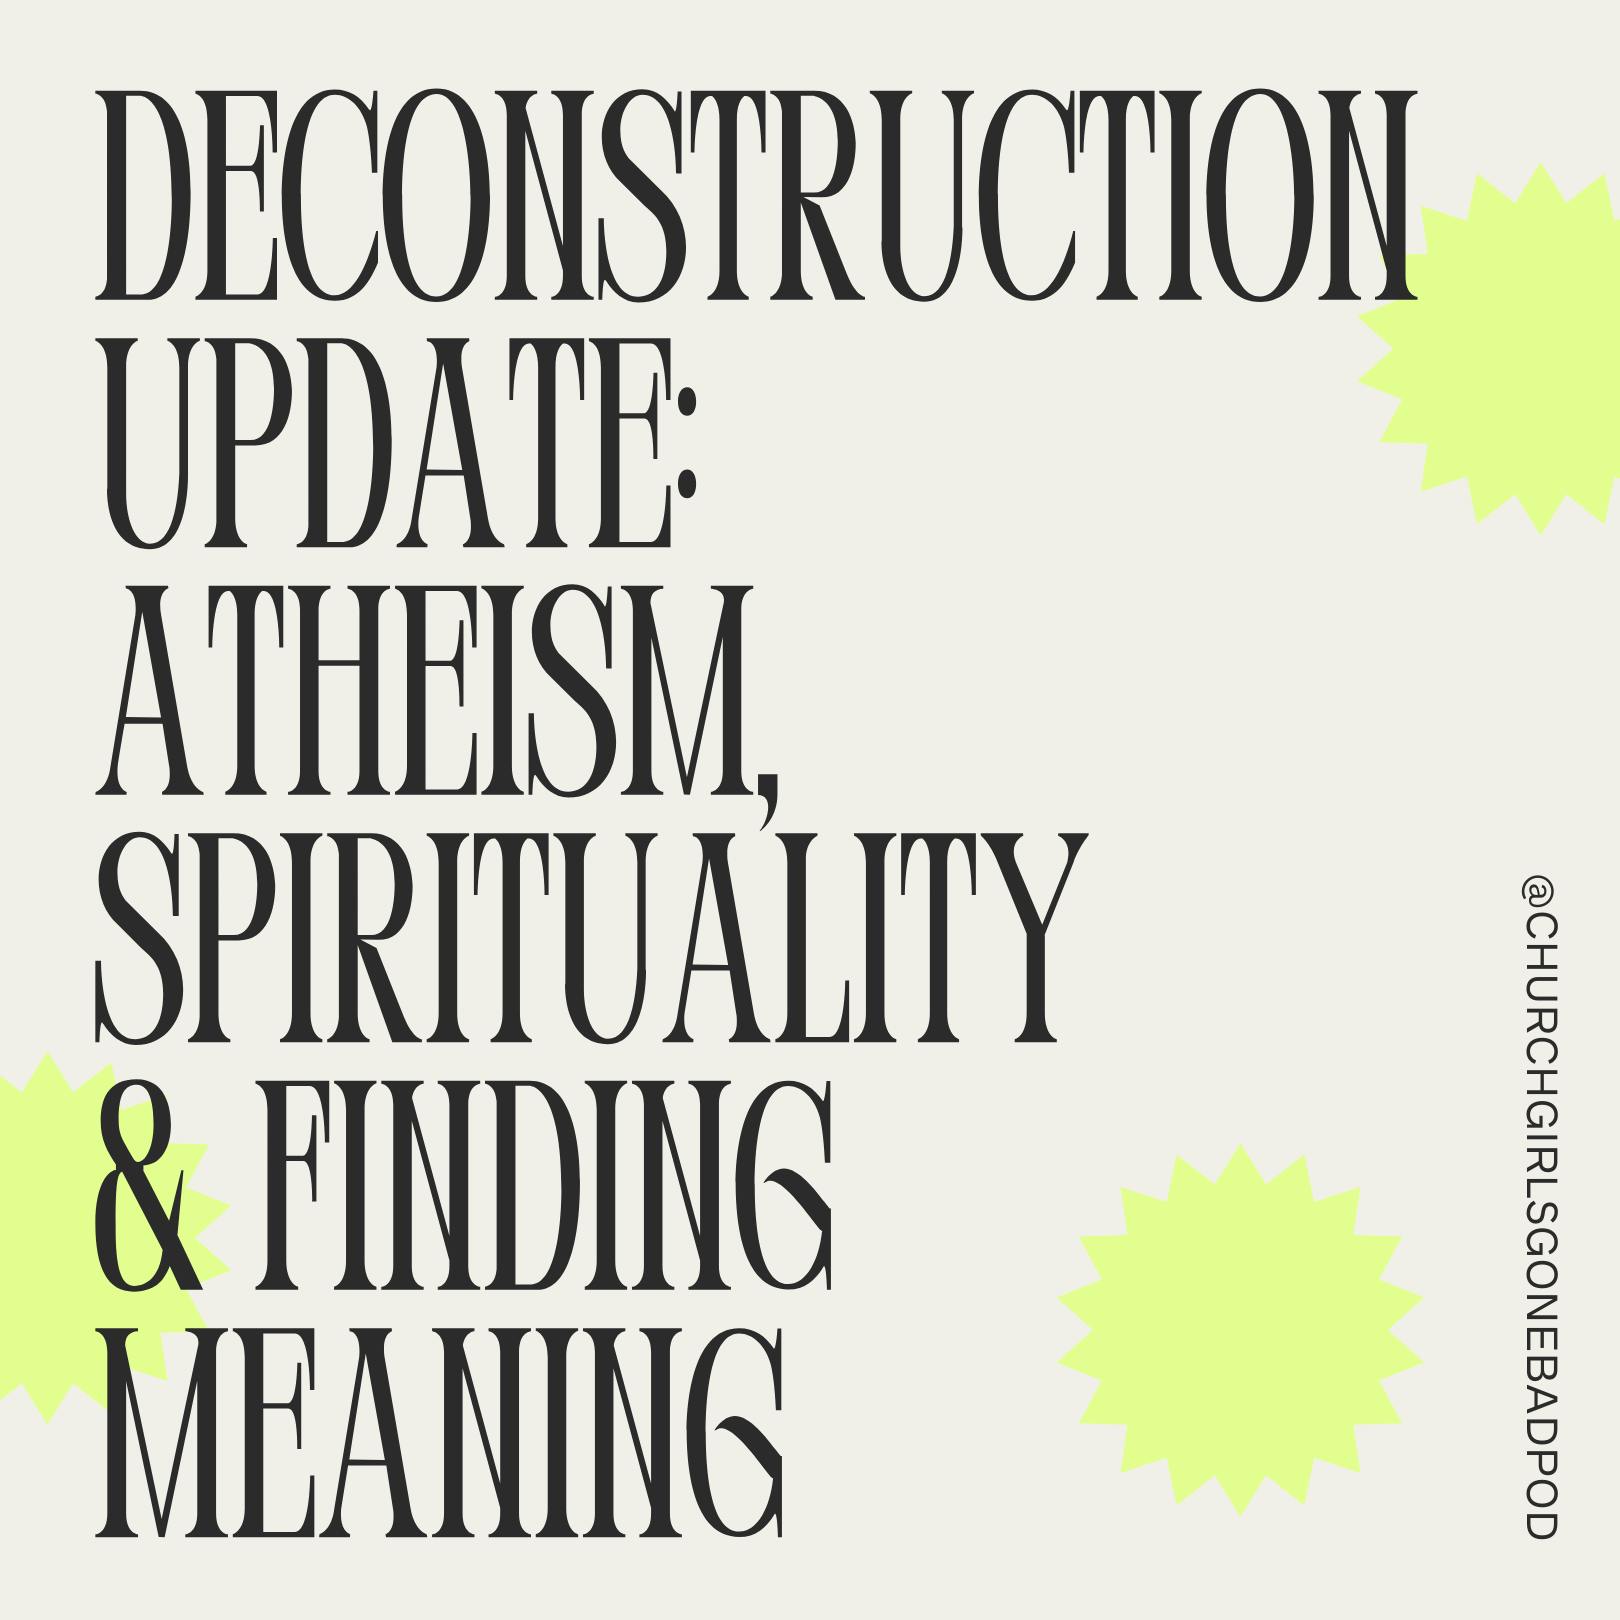 Deconstruction Update: Atheism, Spirituality & Finding Meaning